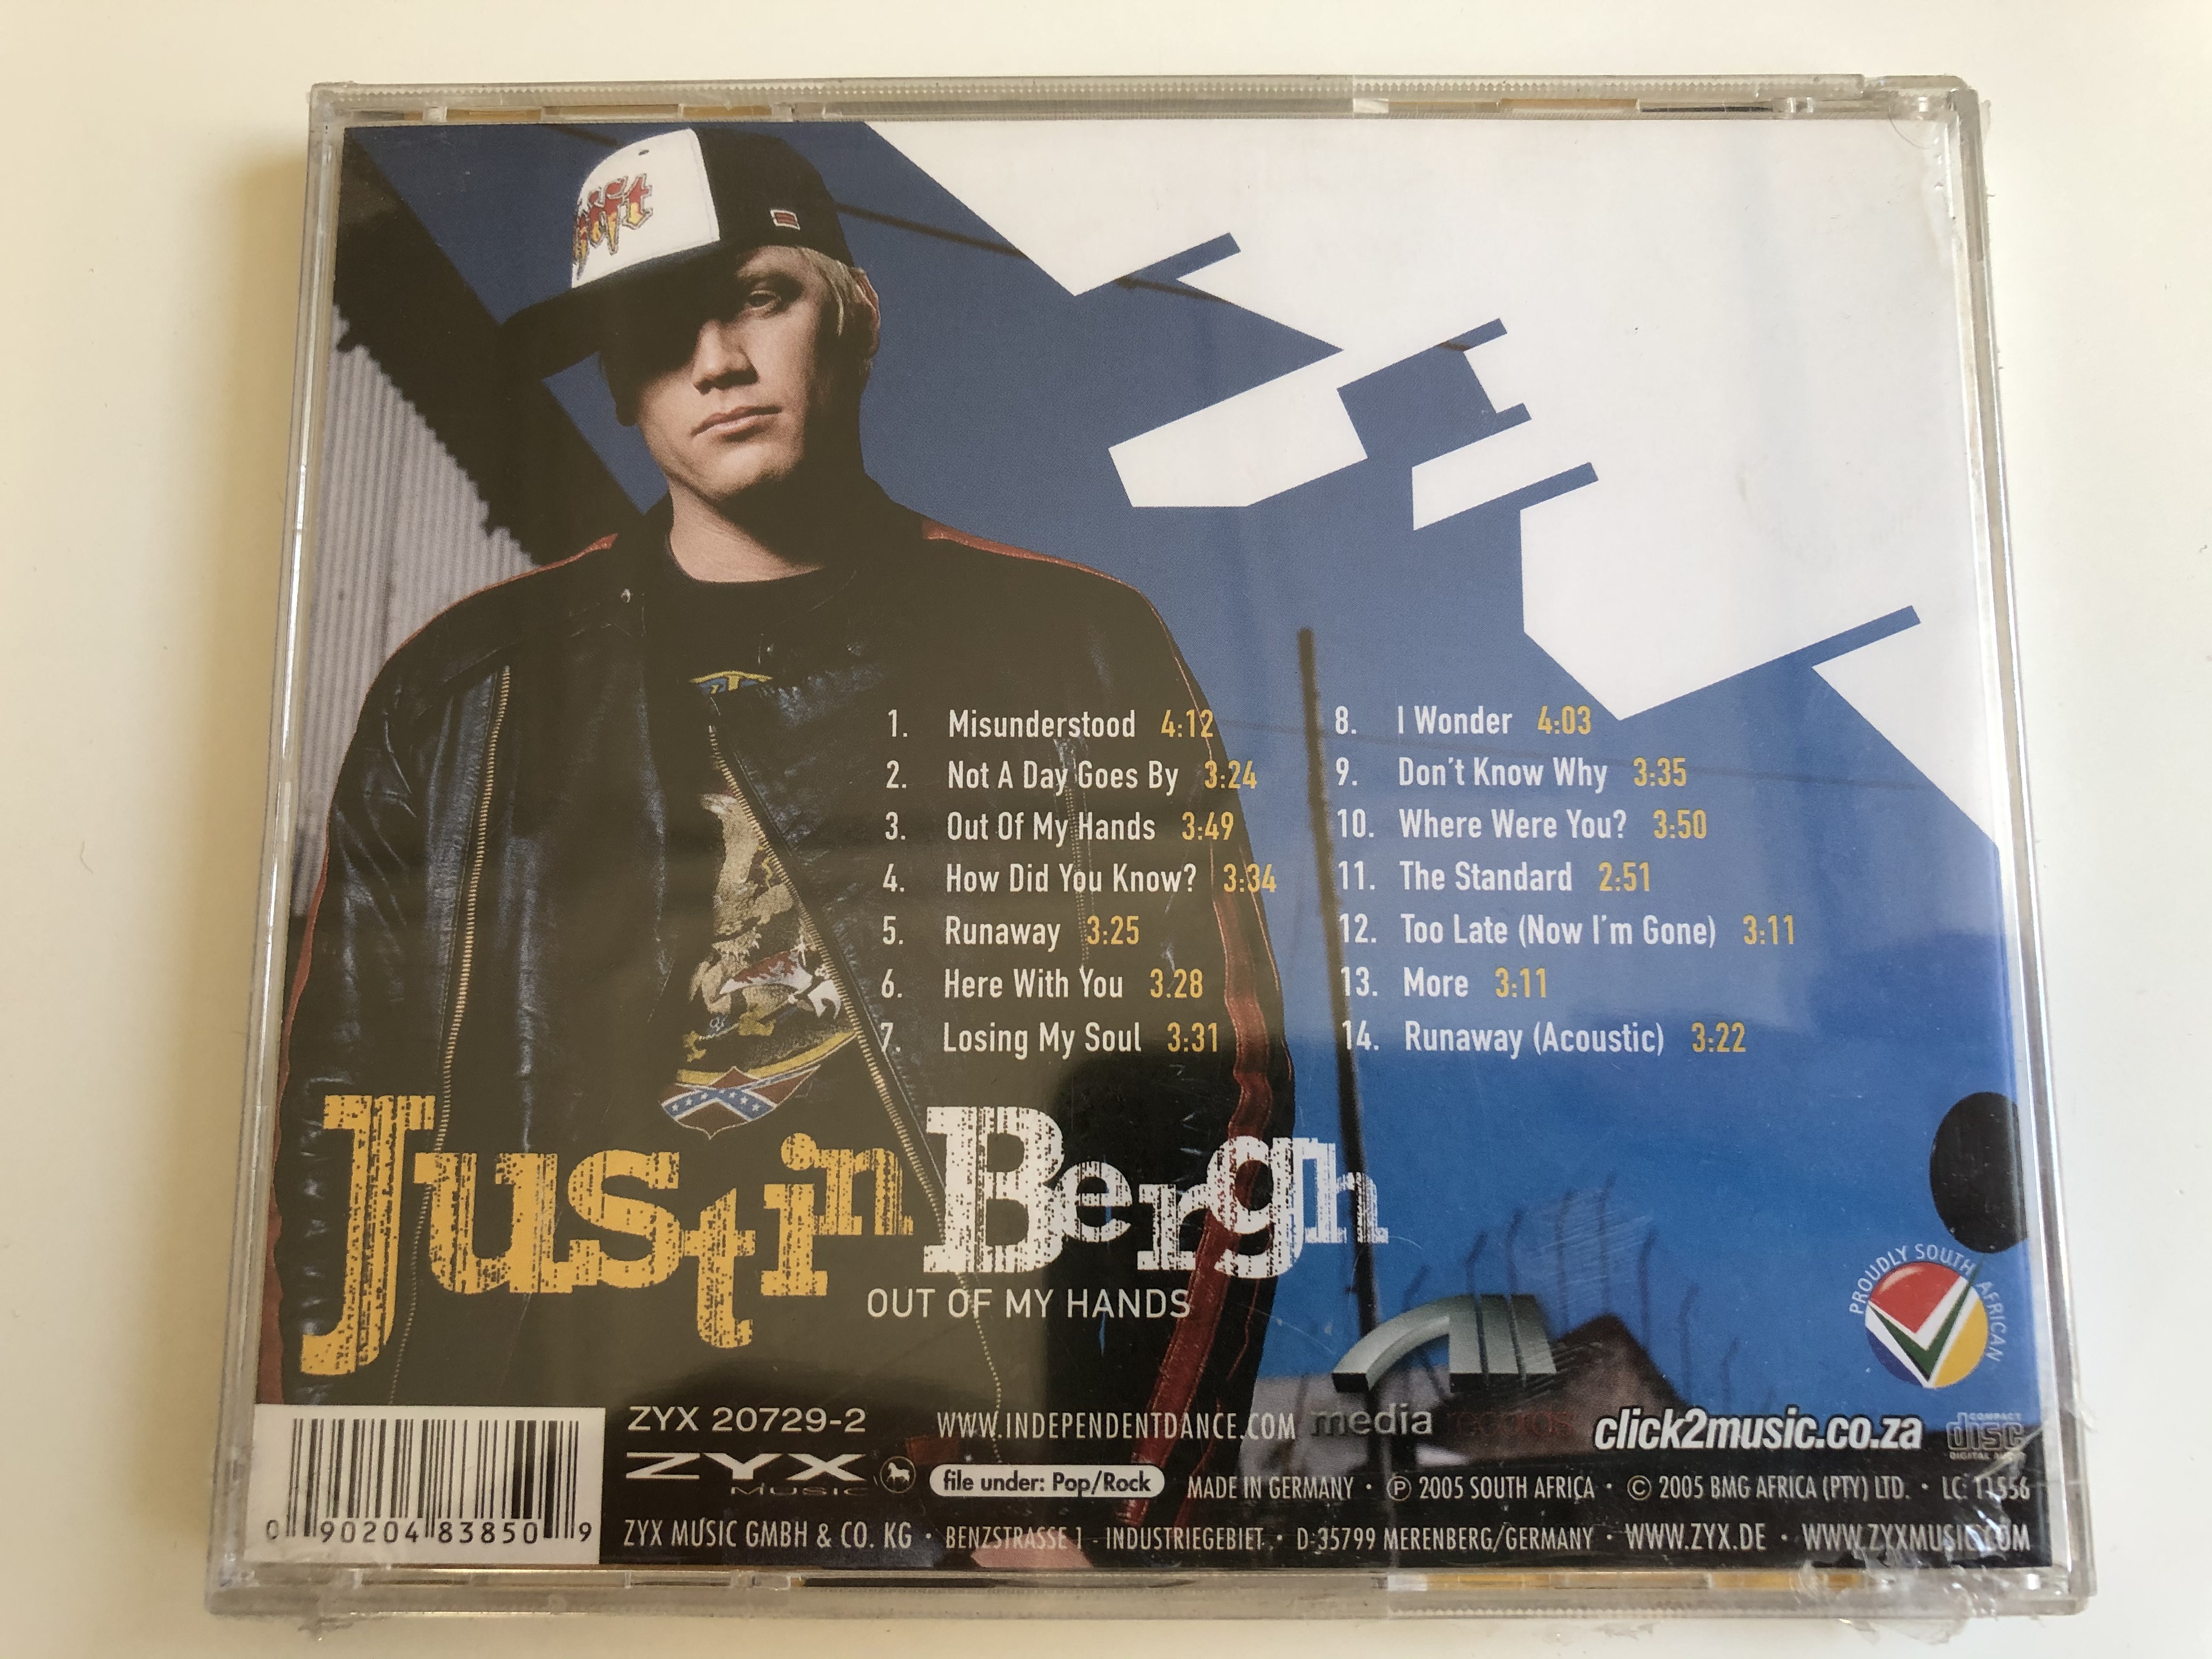 justin-bergh-out-of-my-hands-zyx-music-audio-cd-2005-zyx-20729-2-2-.jpg